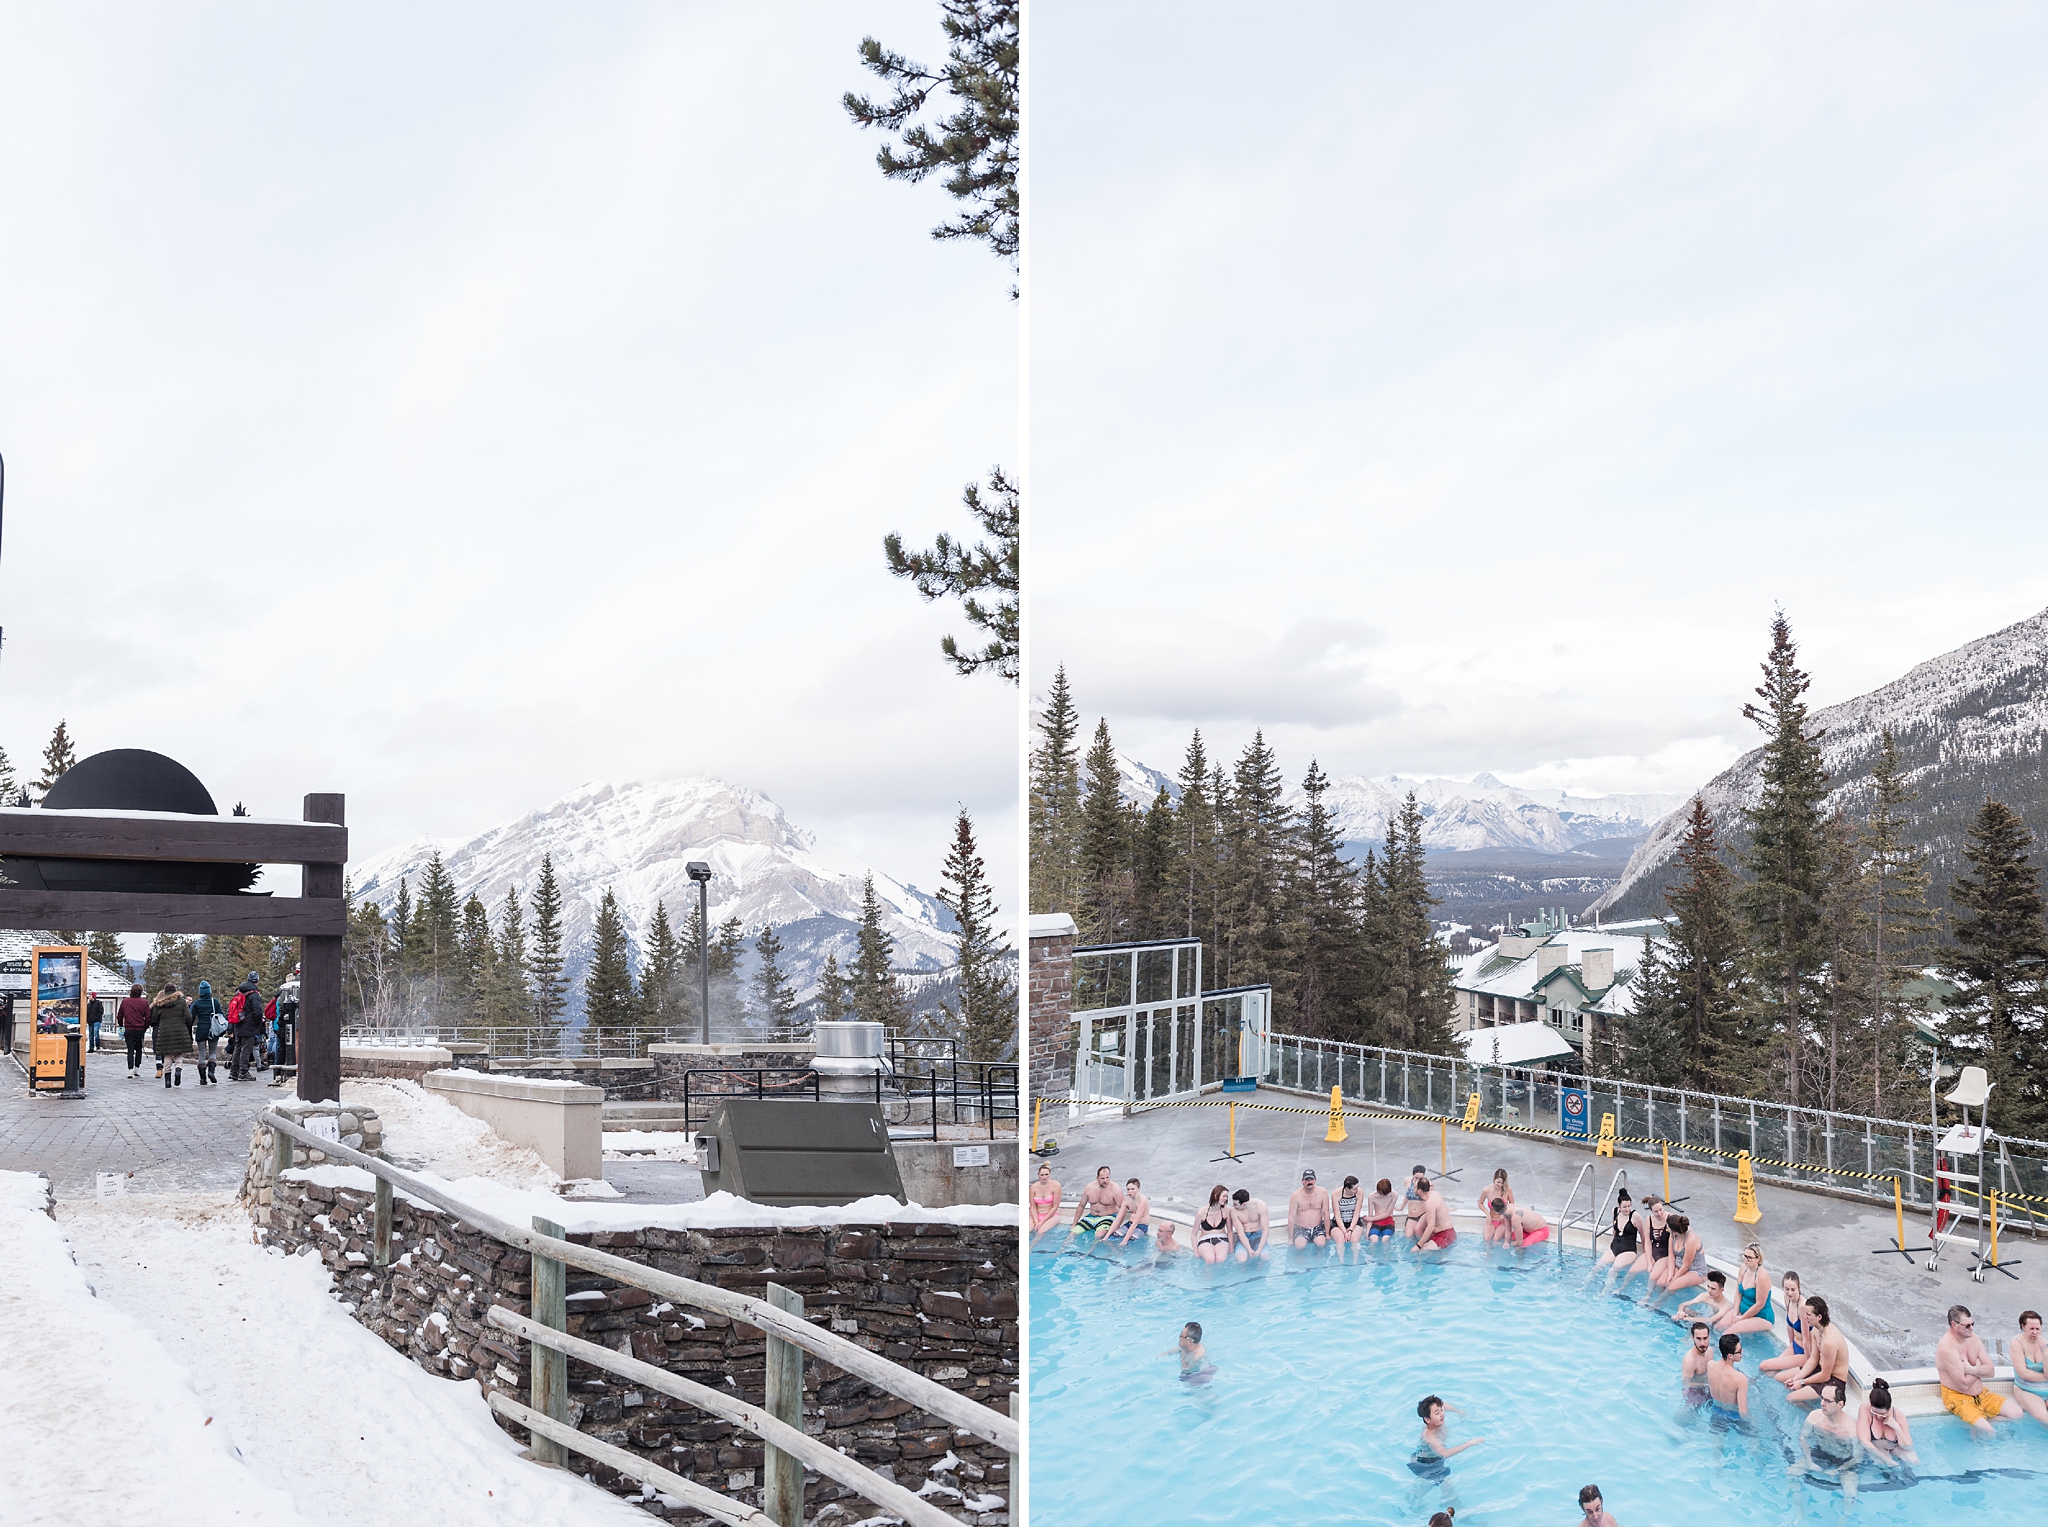 The banff hot springs